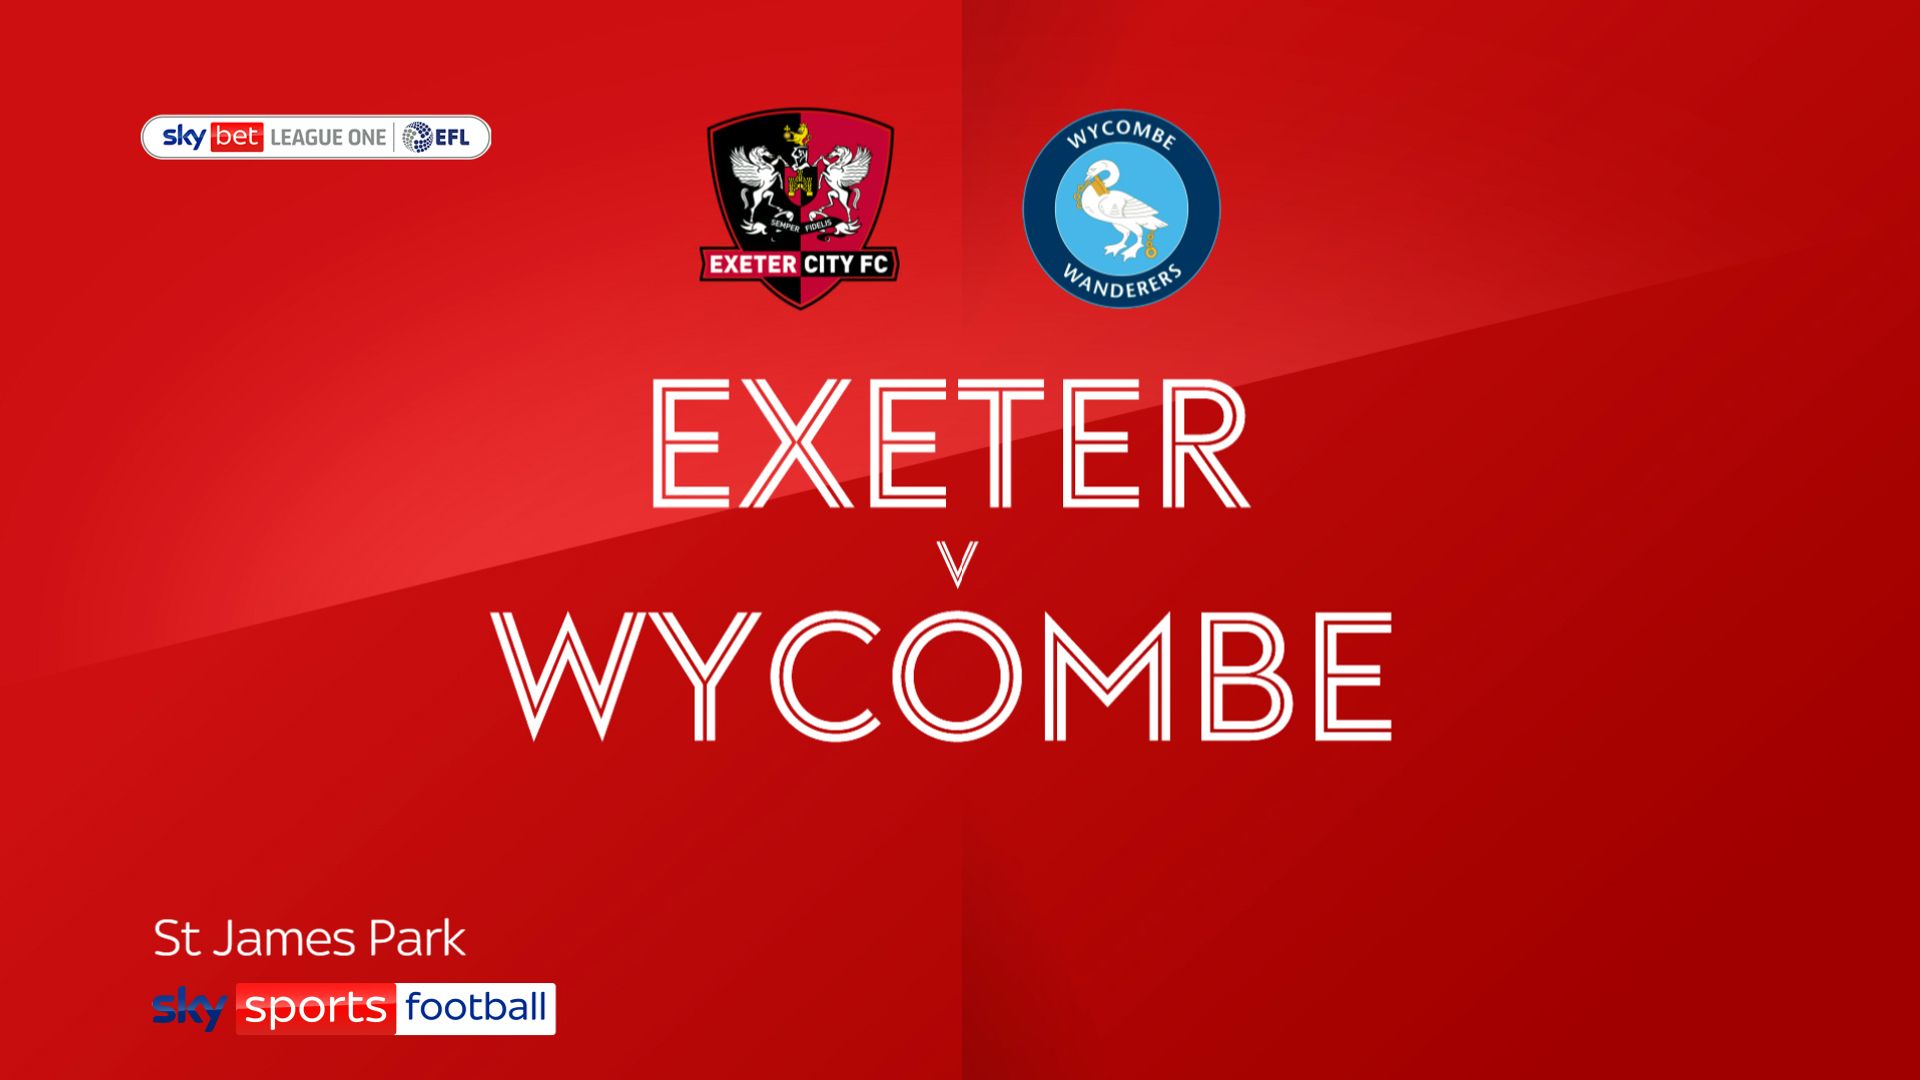 Exeter flying high after convincing home defeat of Wycombe